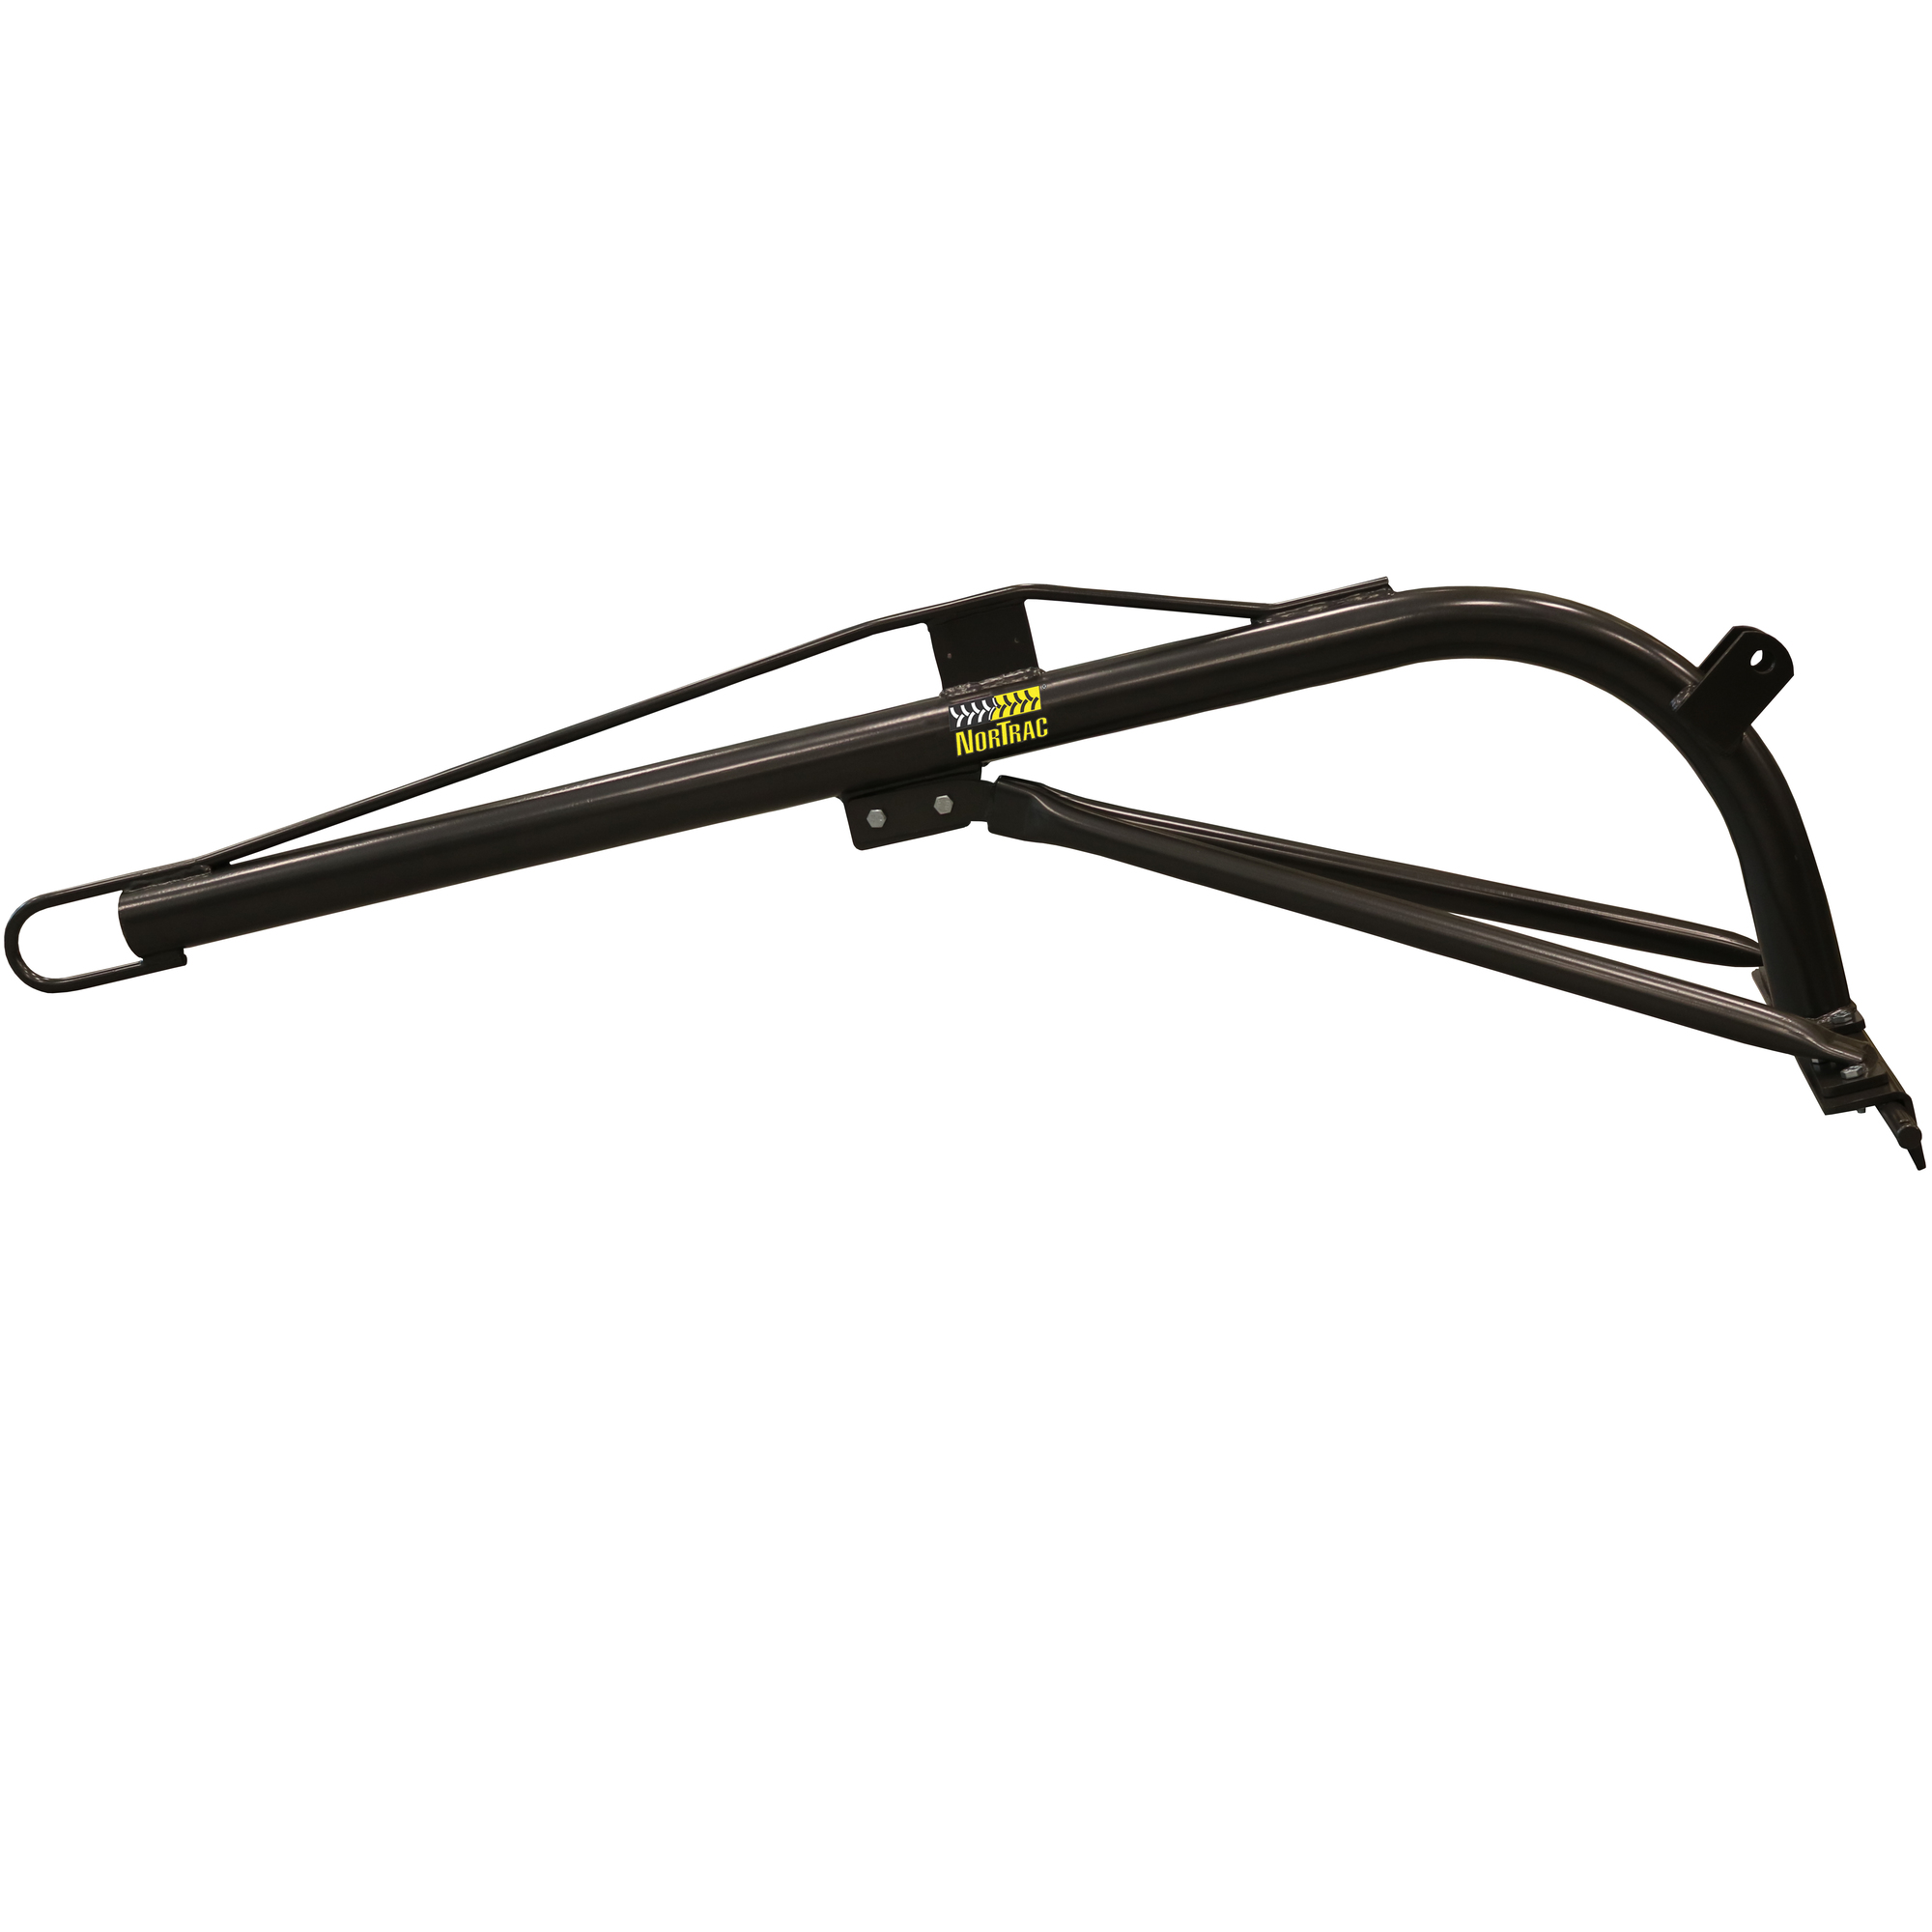 NorTrac 72Inch Boom Pole, 33Inch Working Width, 600-Lb. Capacity, Category 1, Model 64.500.339